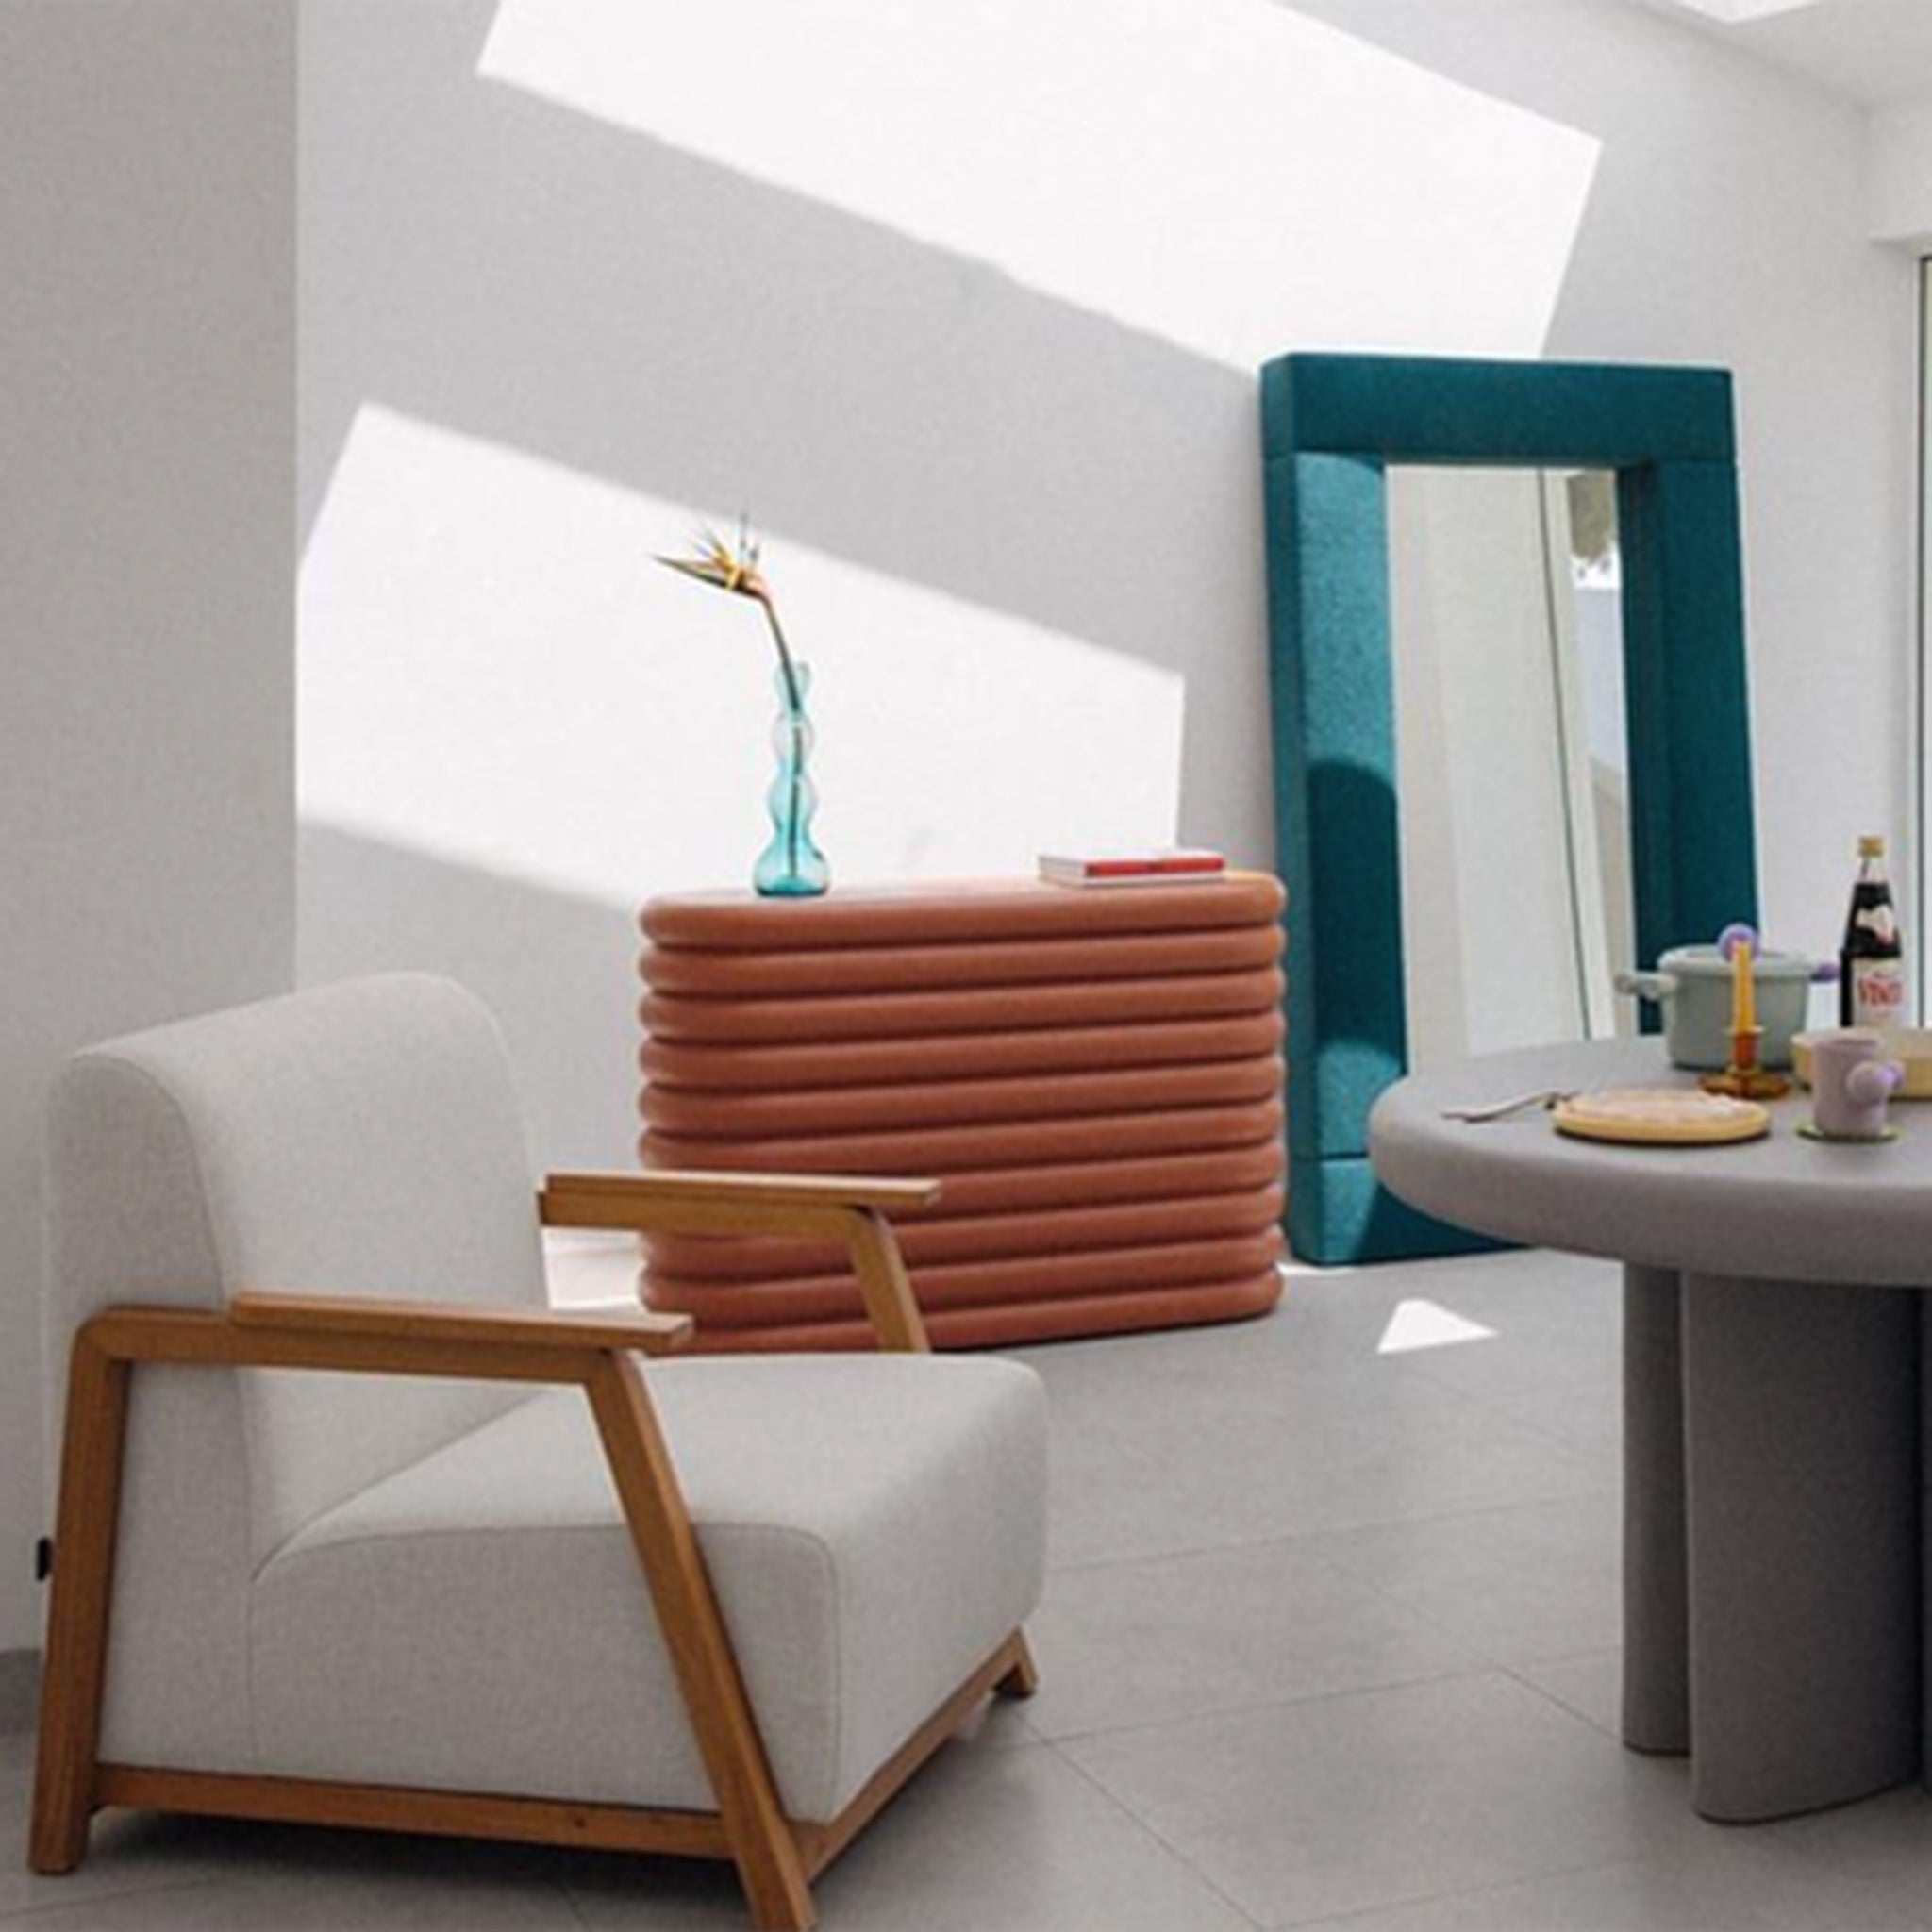 "Contemporary living room featuring a modern console table with a terracotta microplaster finish, a sleek armchair with wooden arms, and a stylish teal mirror, all bathed in natural light."